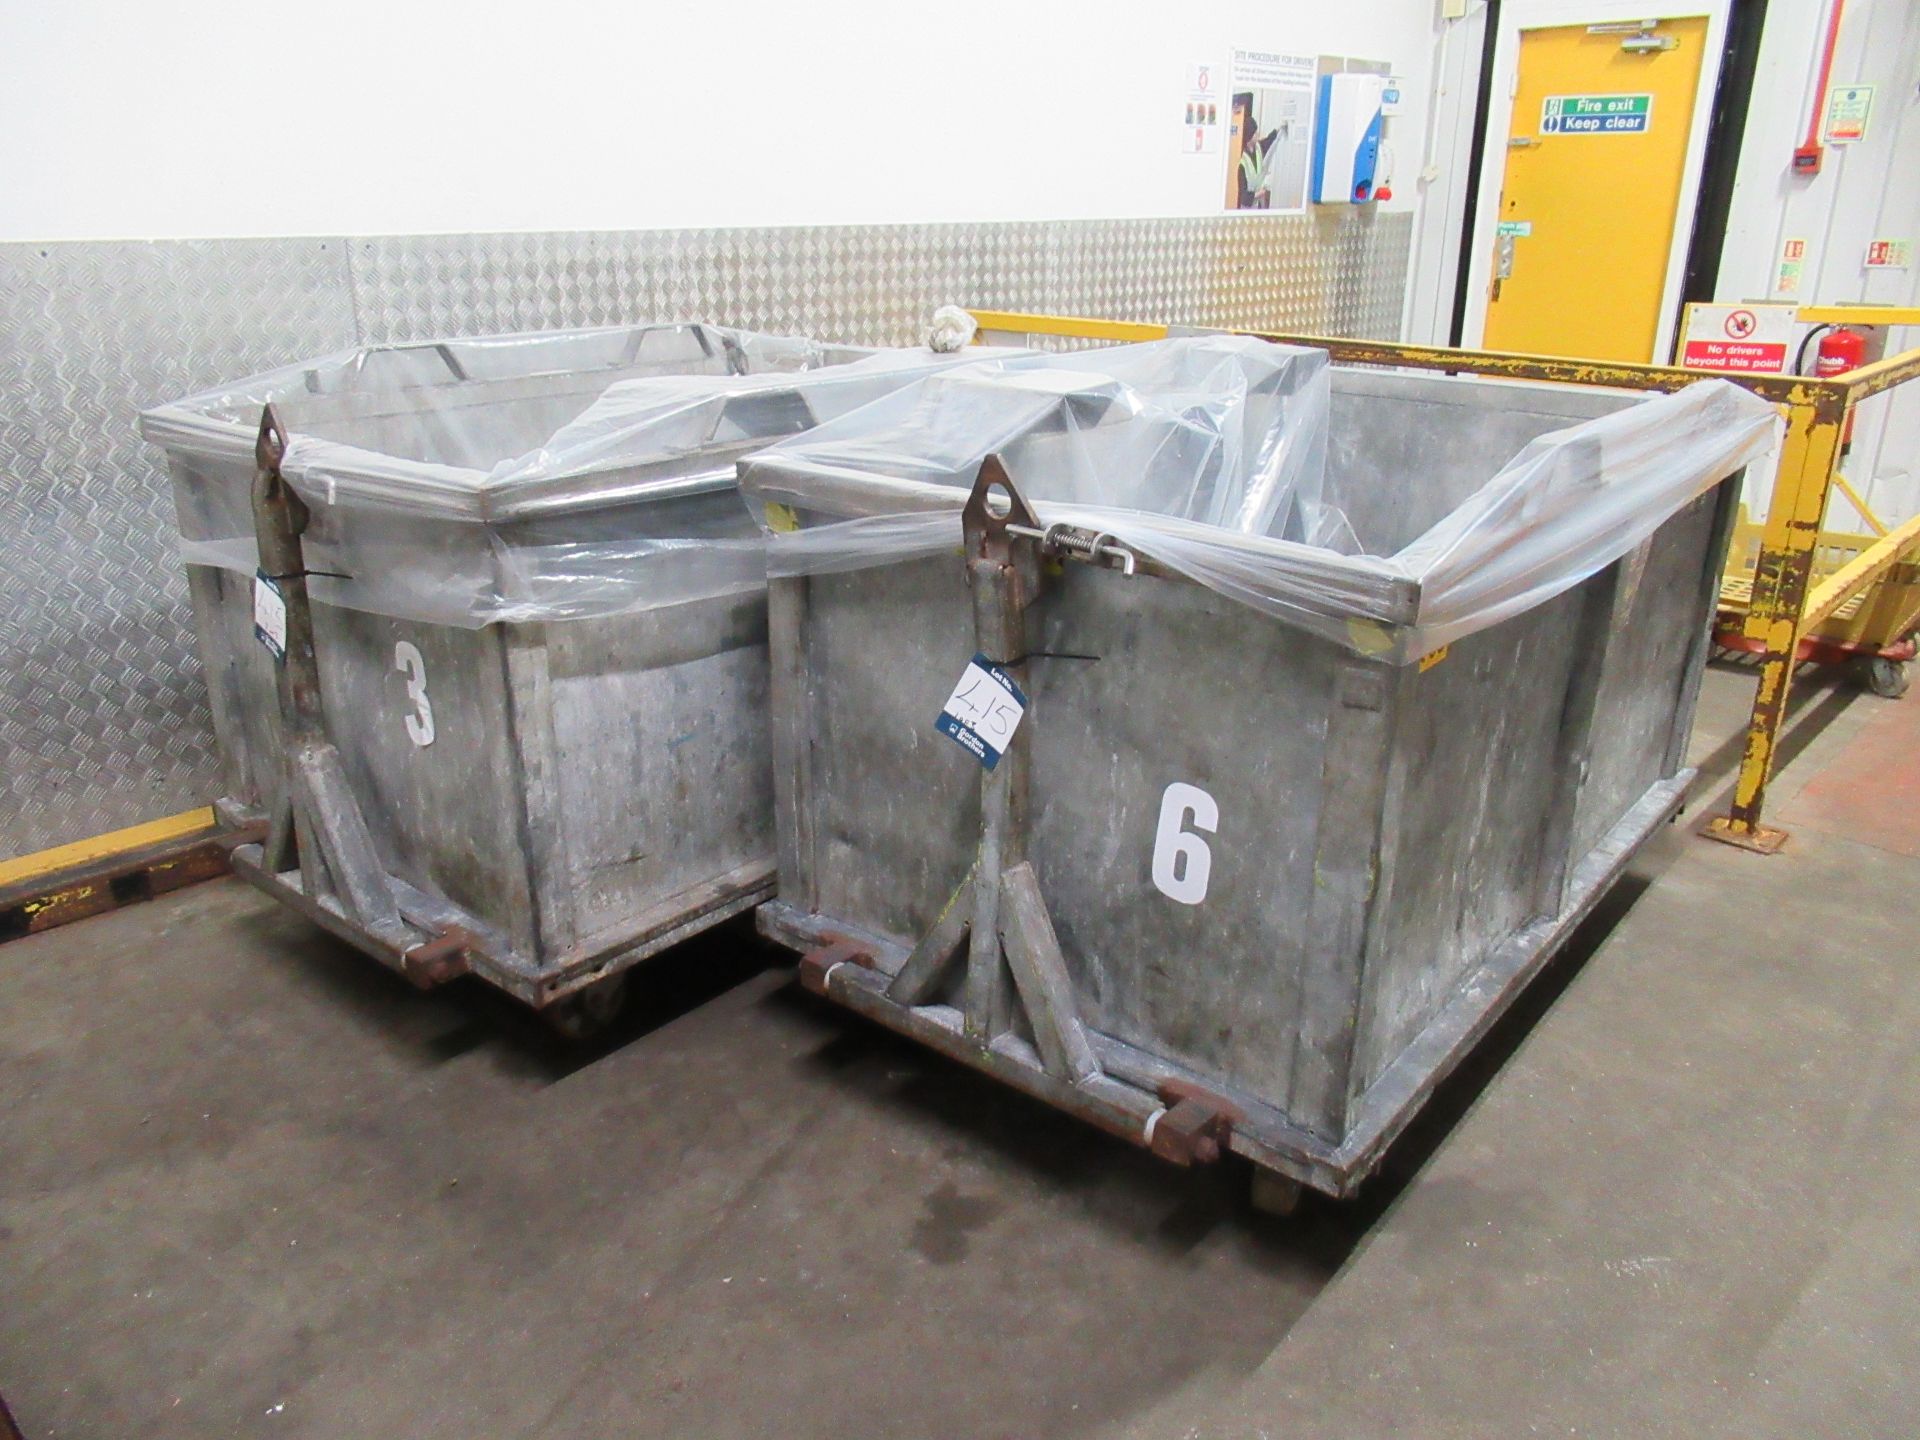 3 Galvanised mobile four wheel waste bins, 1600 x 950 x 750mm high with fold down draw bar